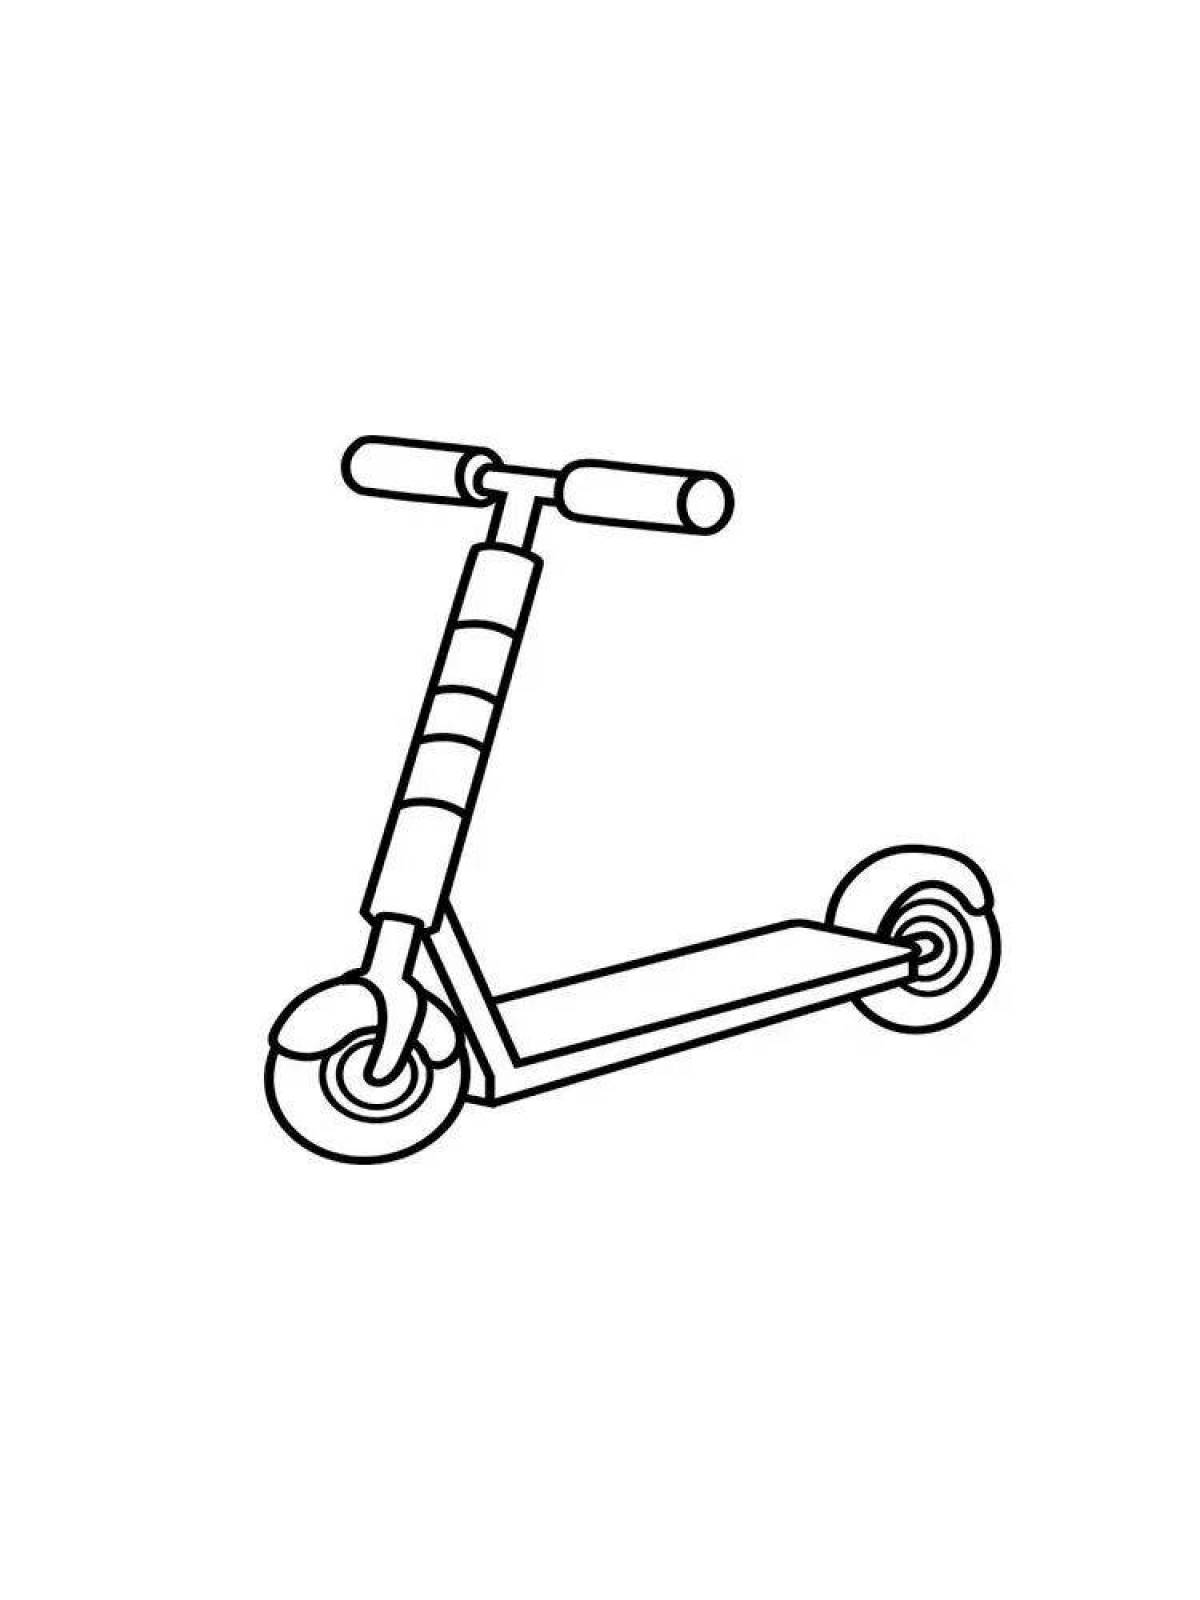 Majestic stunt scooter coloring page